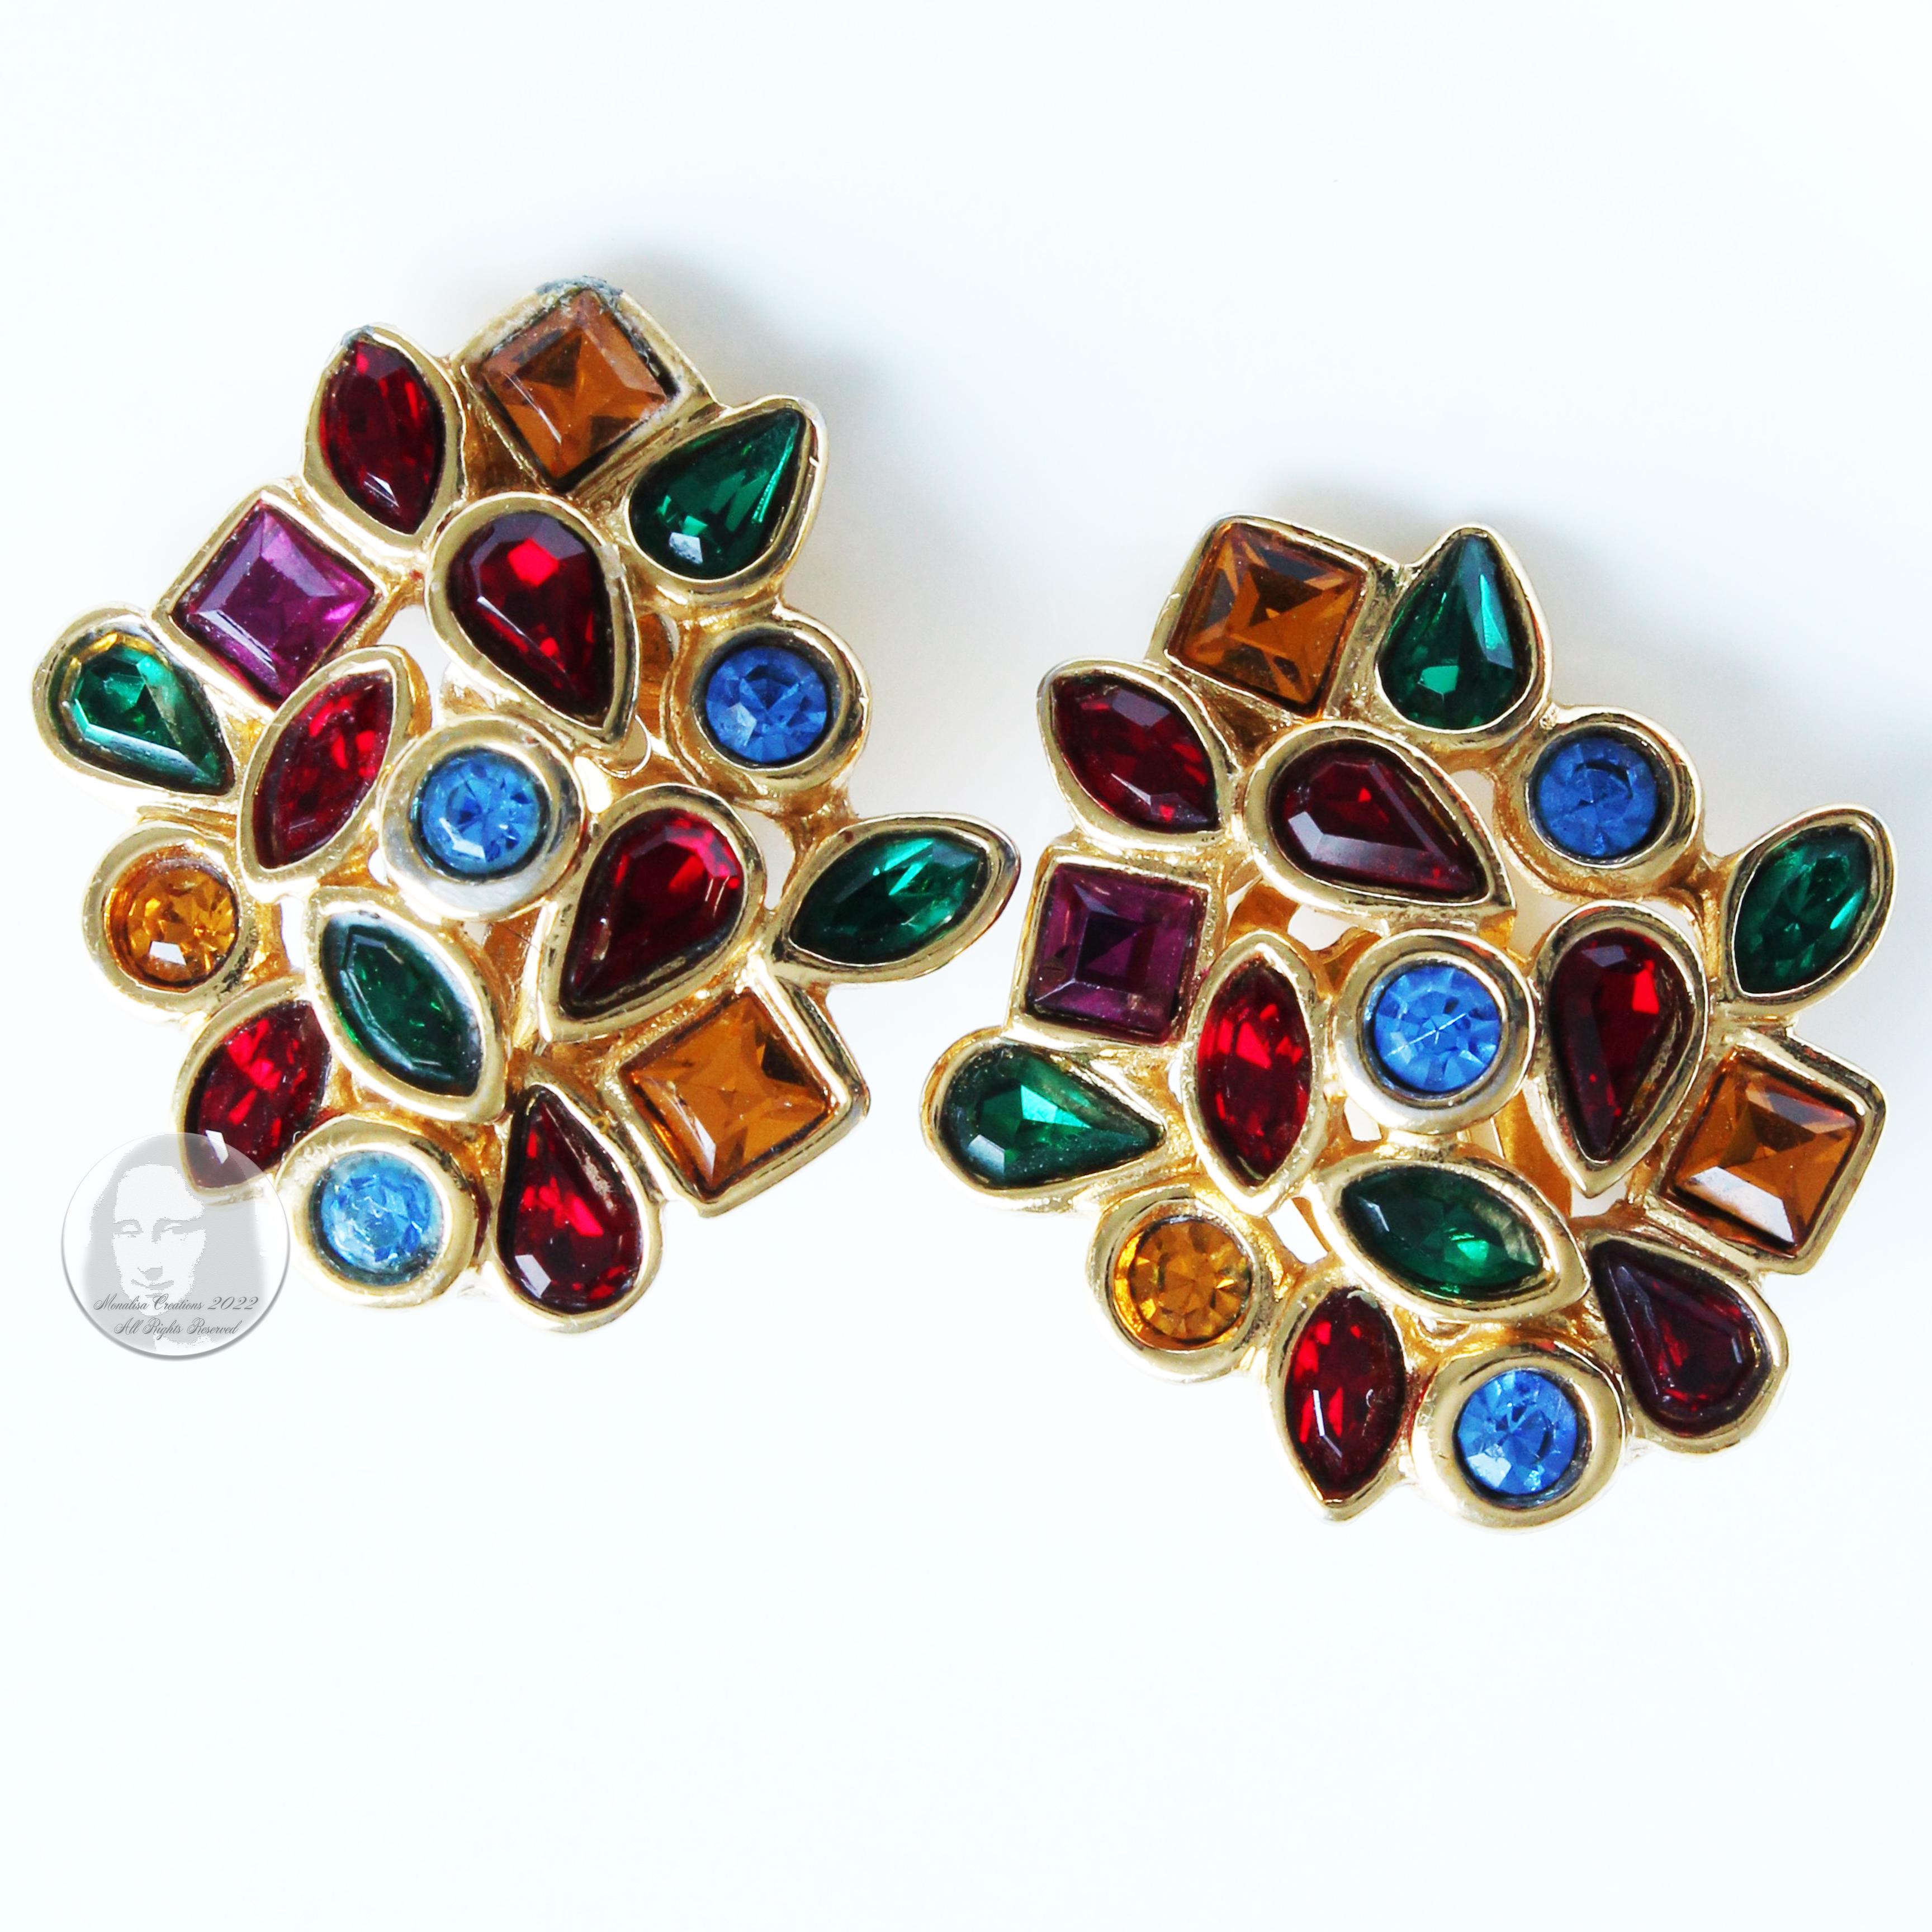 Yves Saint Laurent Earrings Multicolor Glass Rhinestones Clip Style Vintage 80s  In Fair Condition For Sale In Port Saint Lucie, FL